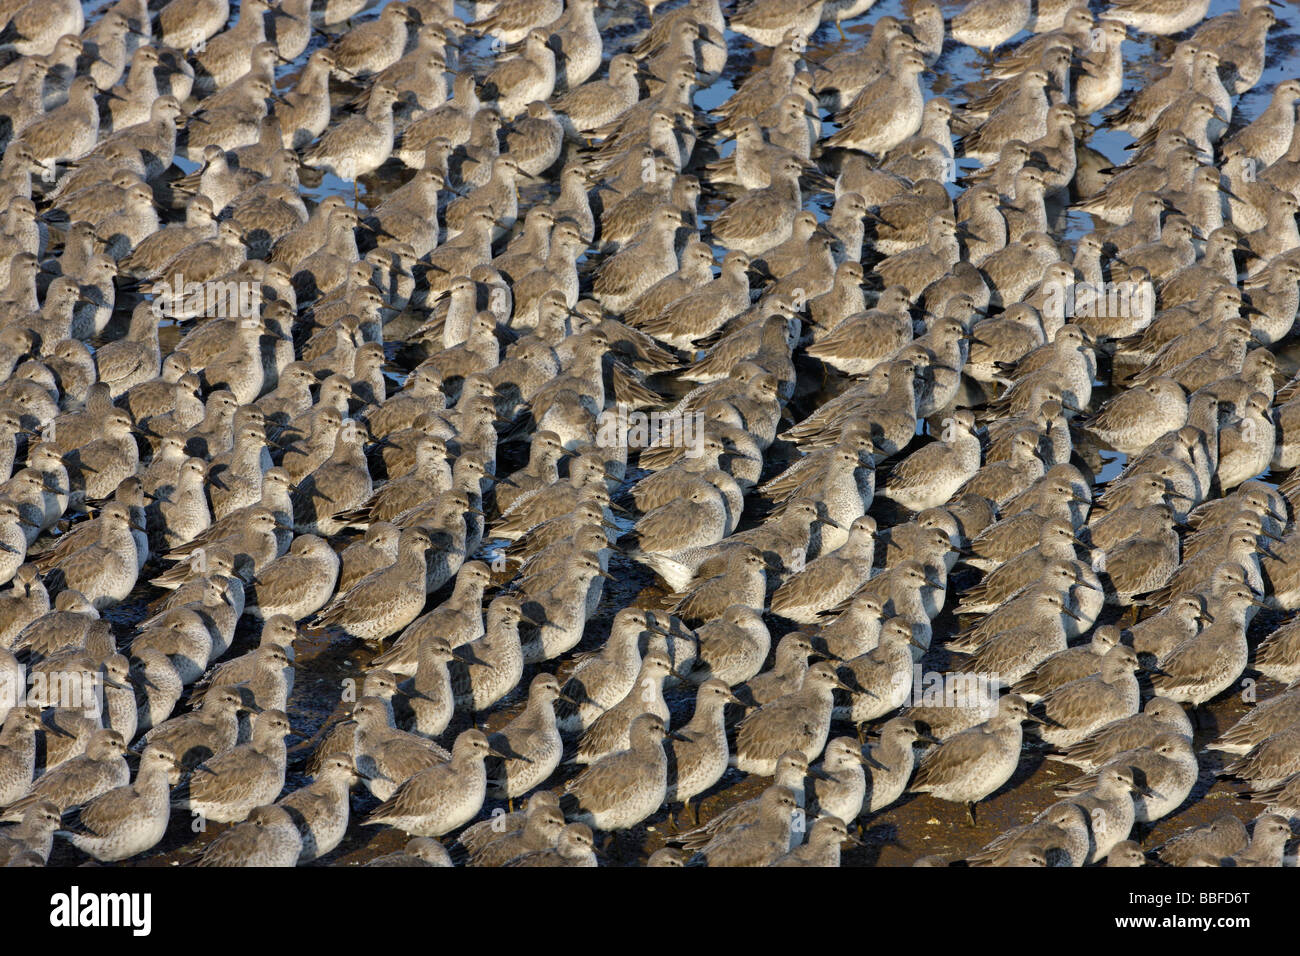 KNOT Calidris canutus in tight packed flock on shore in winter plumage Liverpool Bay UK November Knot Stock Photo